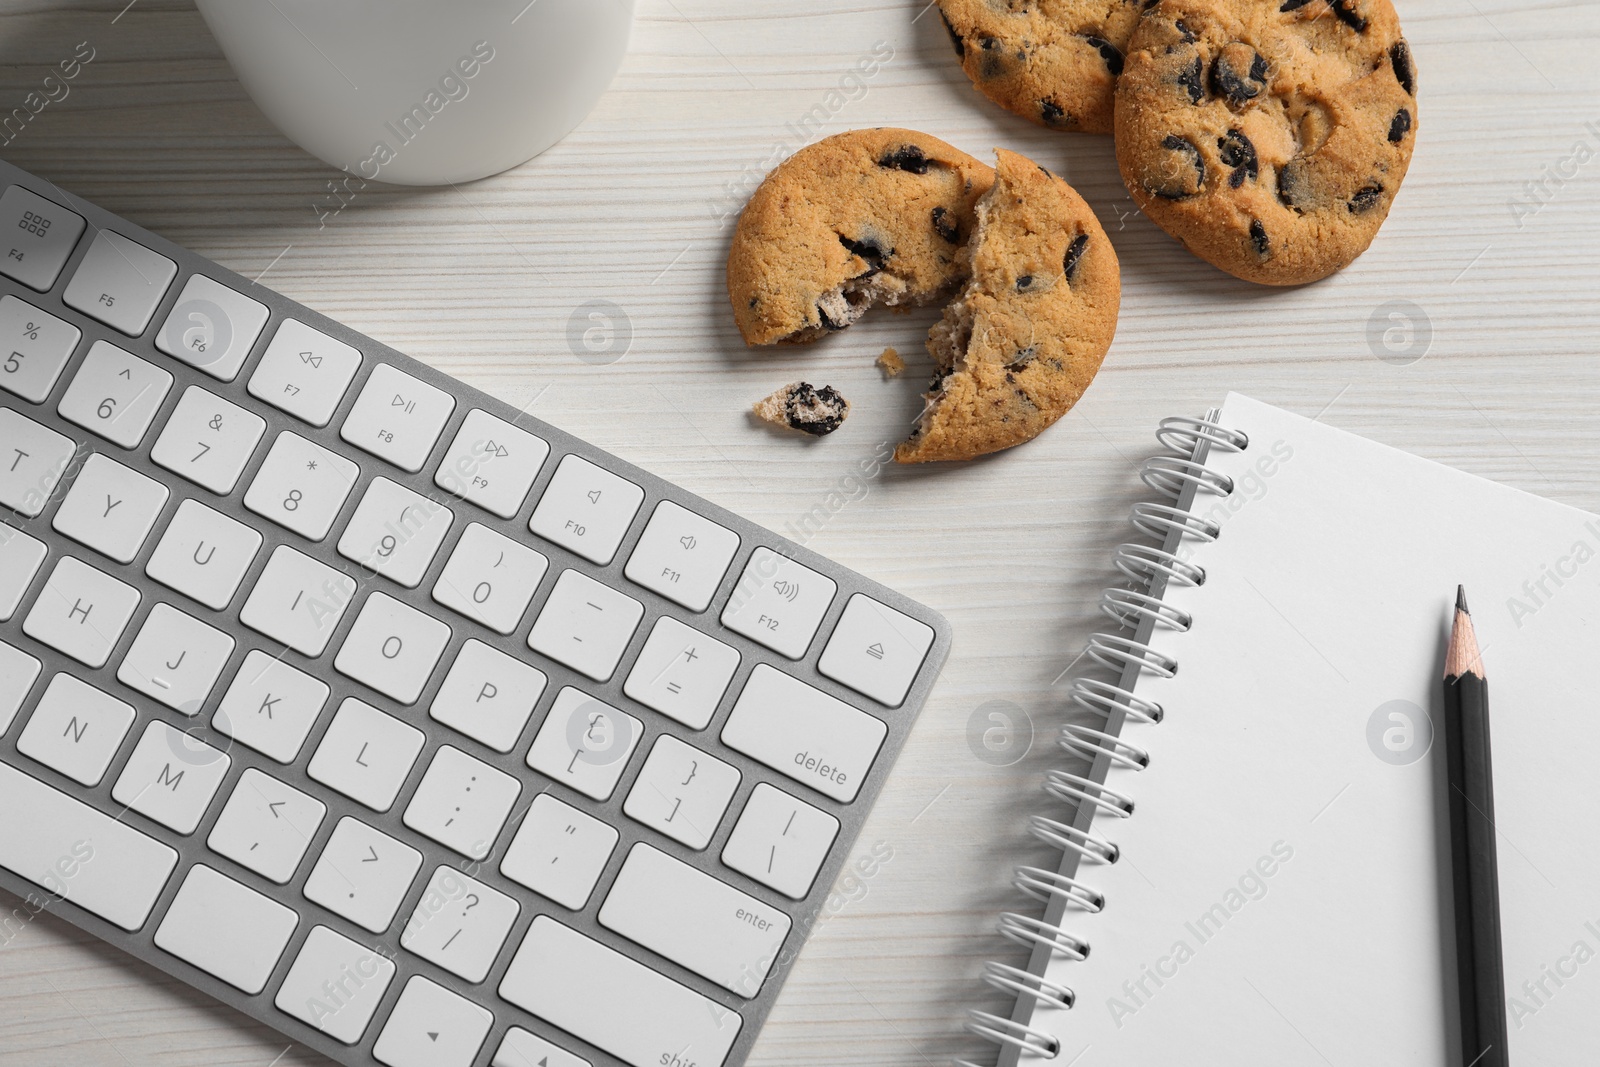 Photo of Chocolate chip cookies, keyboard and office supplies on white wooden table, flat lay